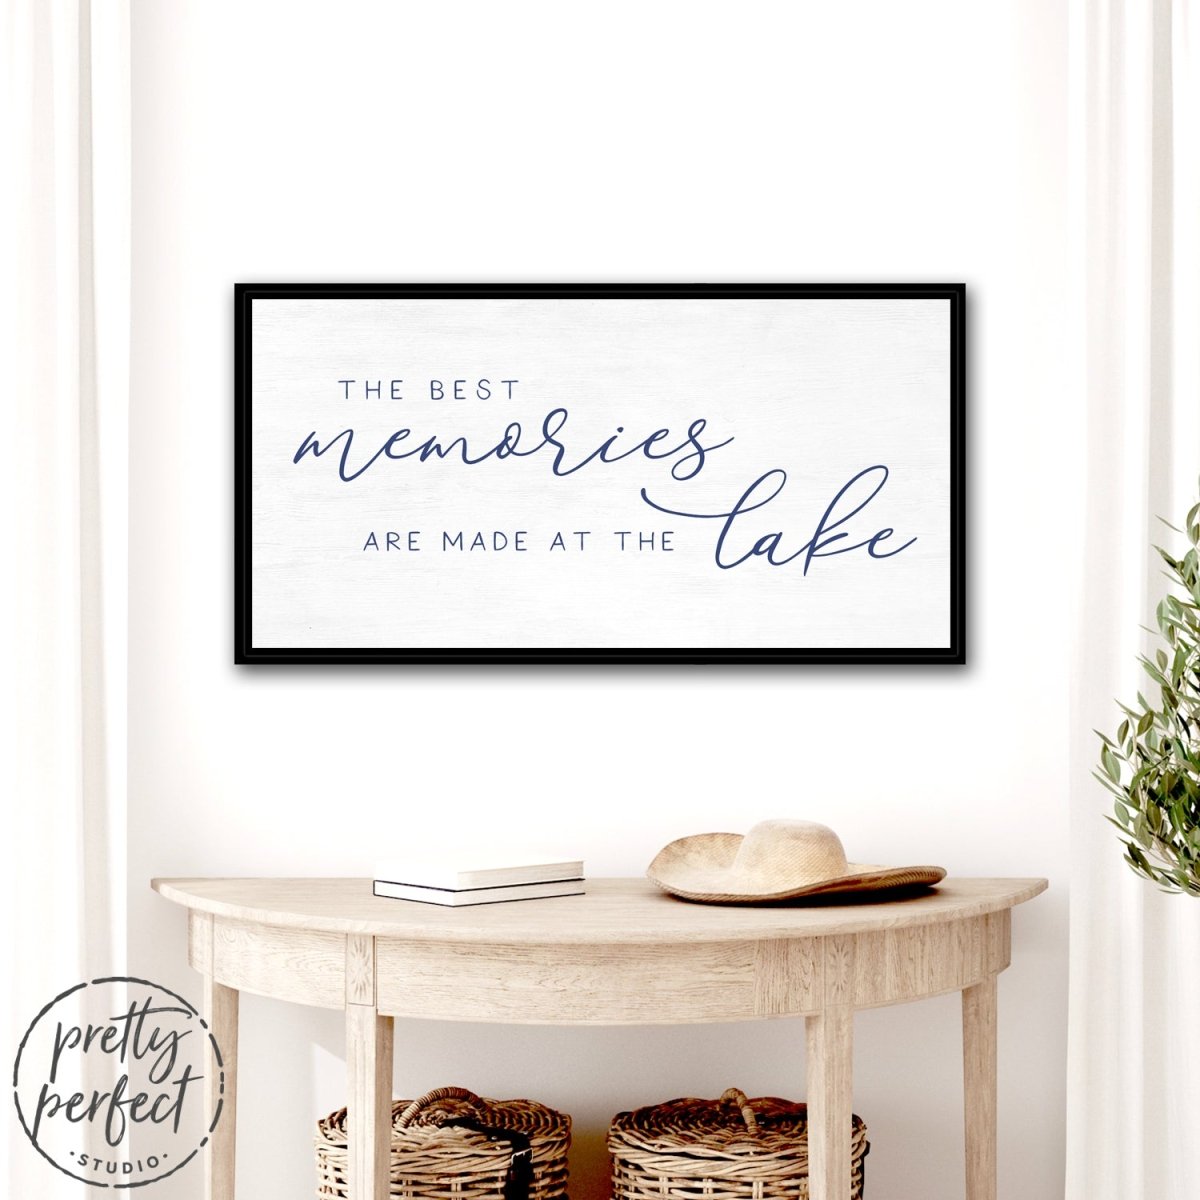 The Best Memories Are Made At The Lake Wall Art Hanging on Wall Above Entryway Table - Pretty Perfect Studio